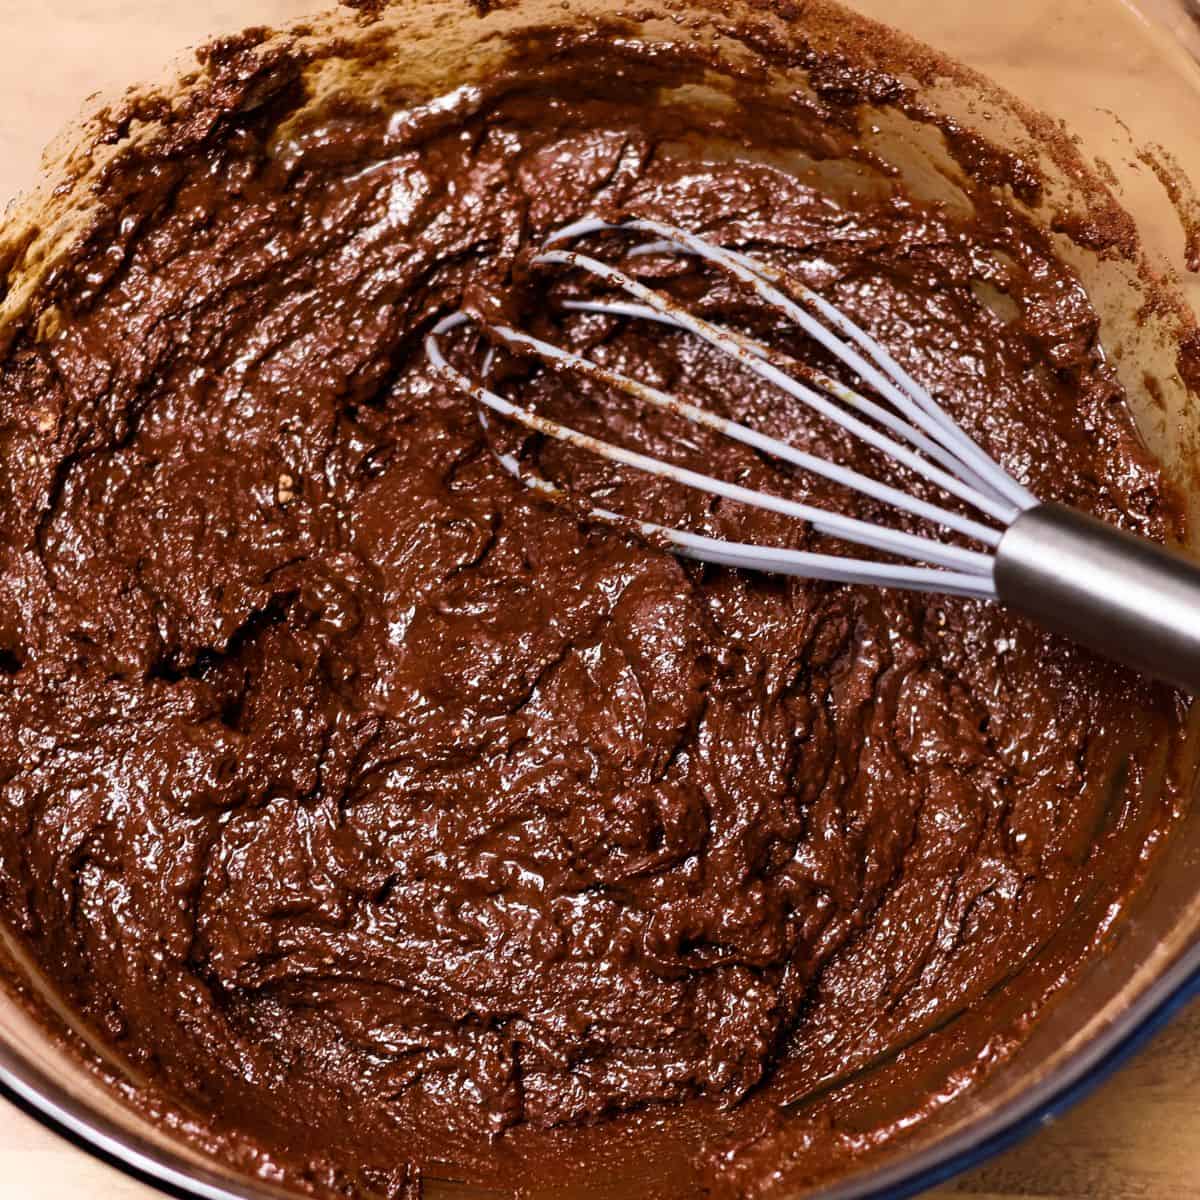 A whisk mixing the wet and dry ingredients together in a bowl to create a smooth, dark brownie batter.